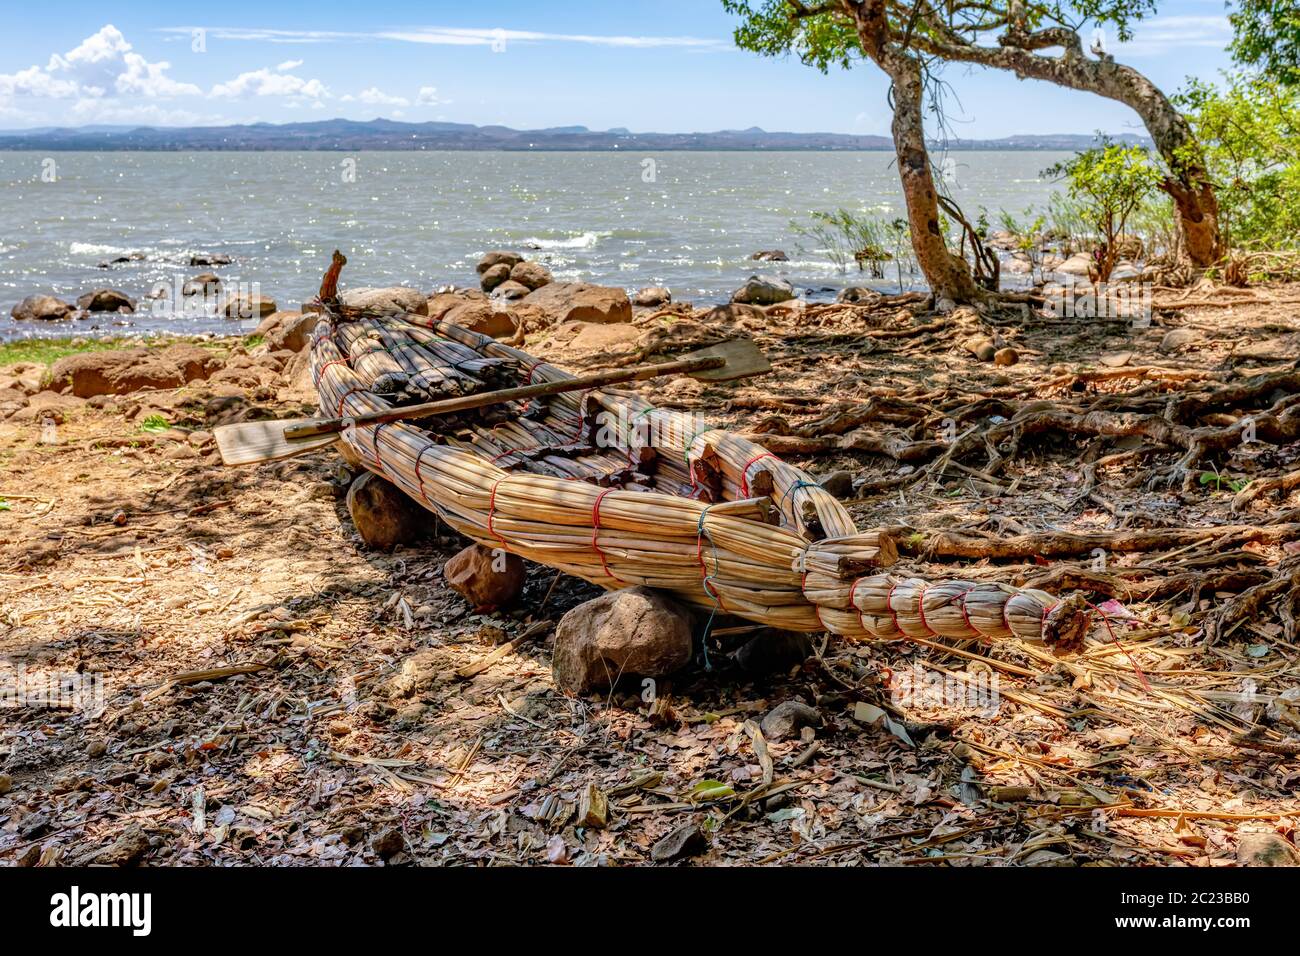 Traditional fishing papyrus boat from reed, on Lake Tana in Bahir Dar, Ethiopia Stock Photo